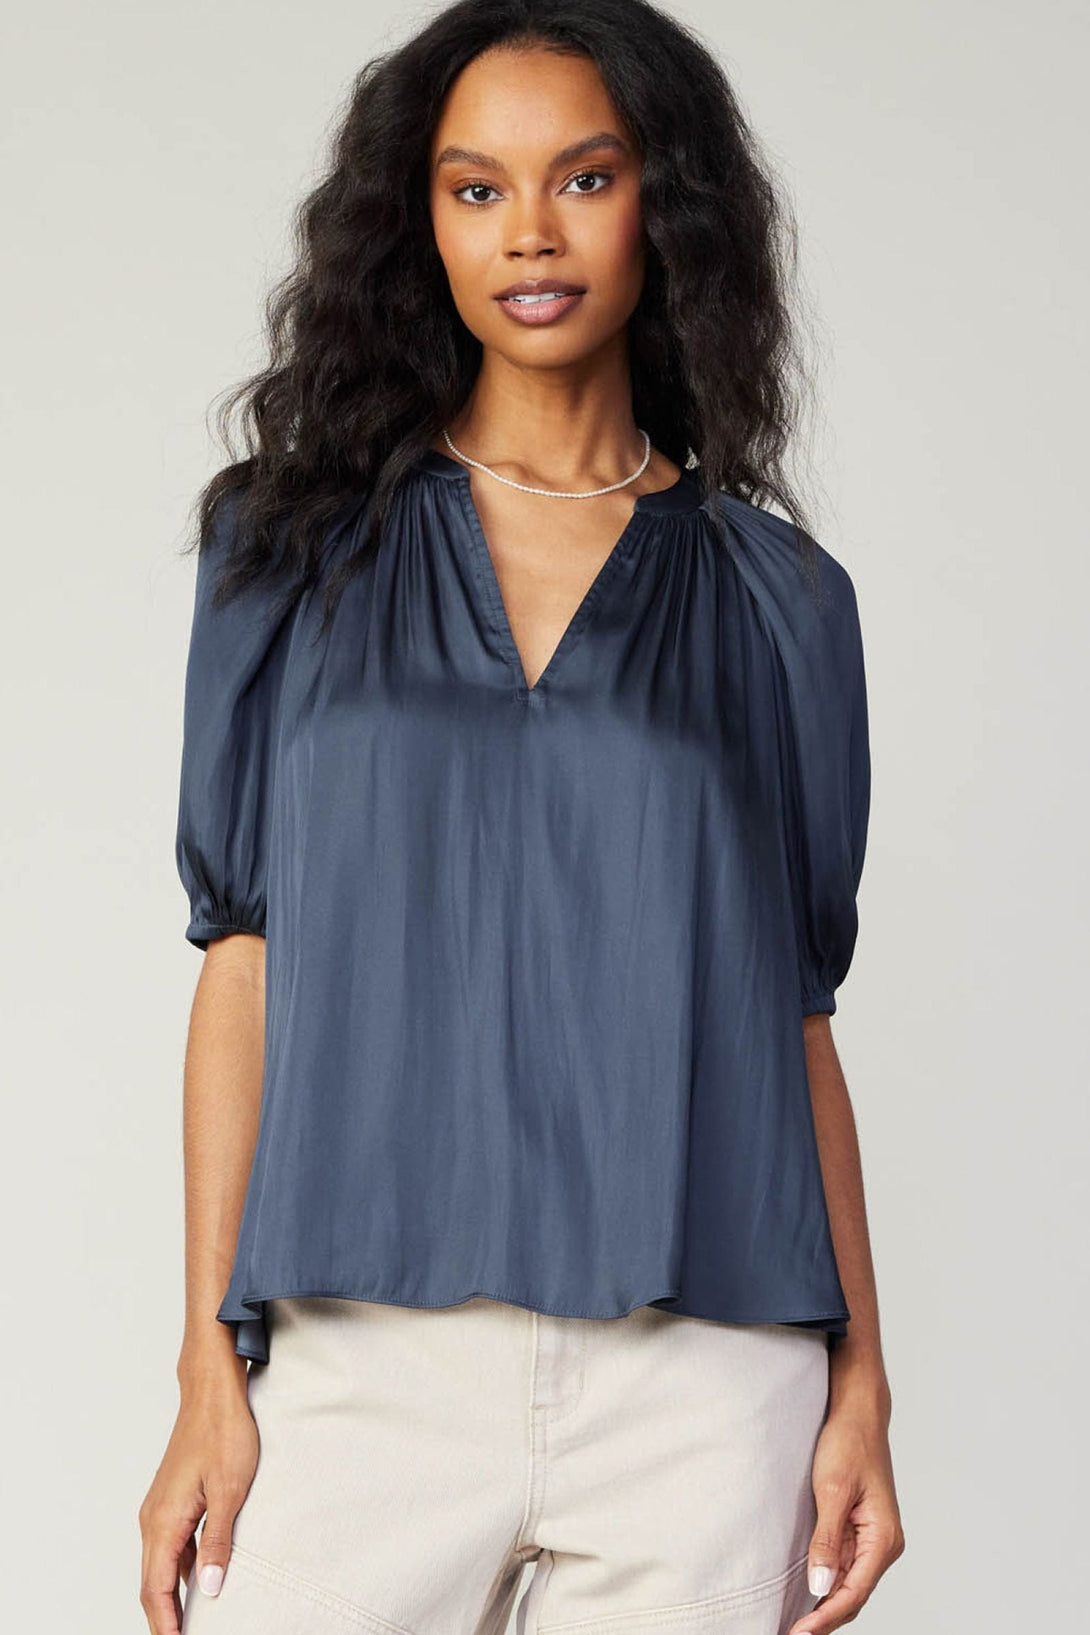 Current Air Half Sleeve V Neck Blouse with Gathered Detail on Sleeves and Neck